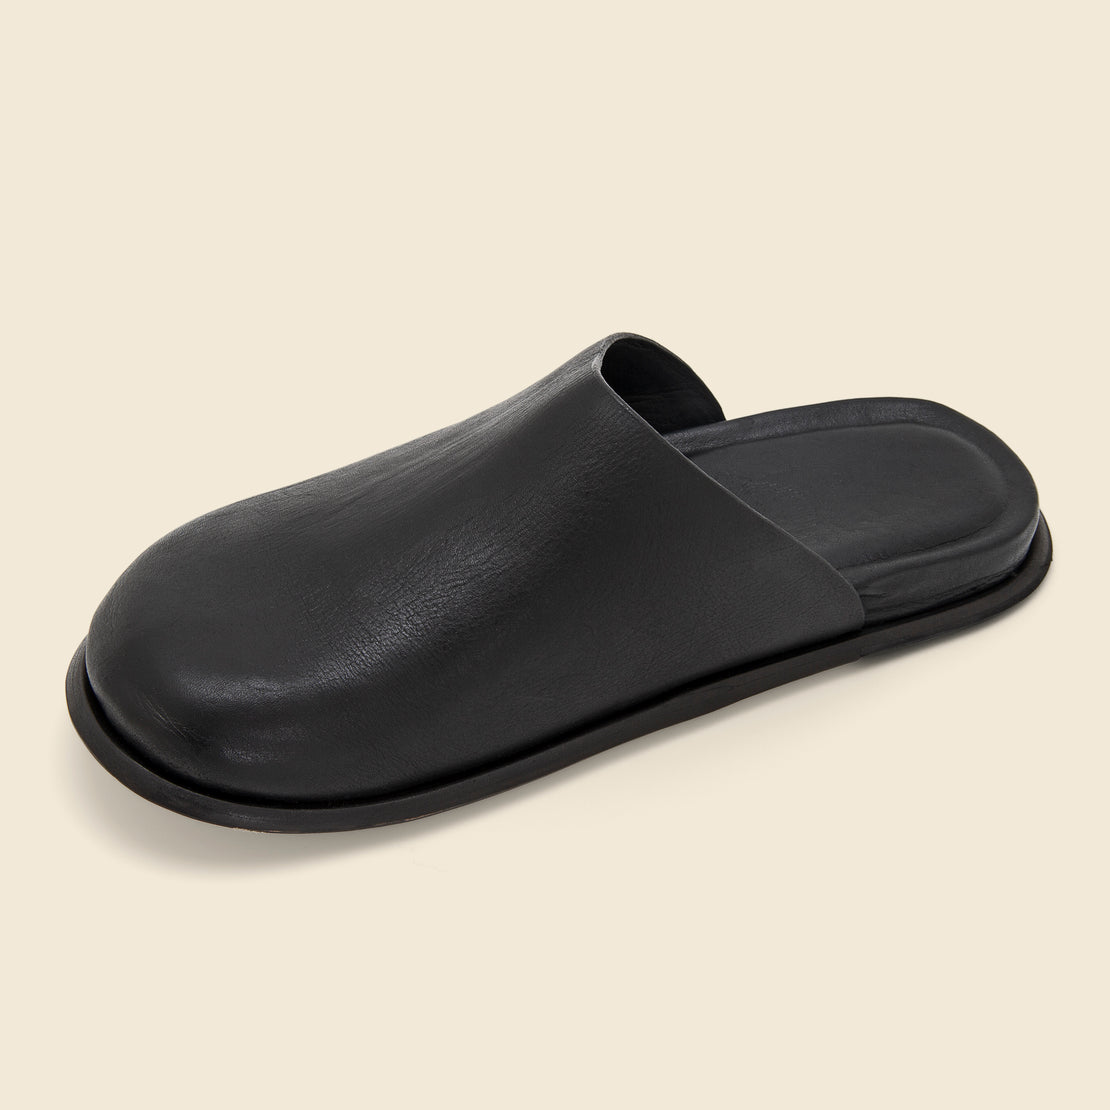 Ogden Slide - Black - Wal & Pai - STAG Provisions - W - Shoes - Sandals